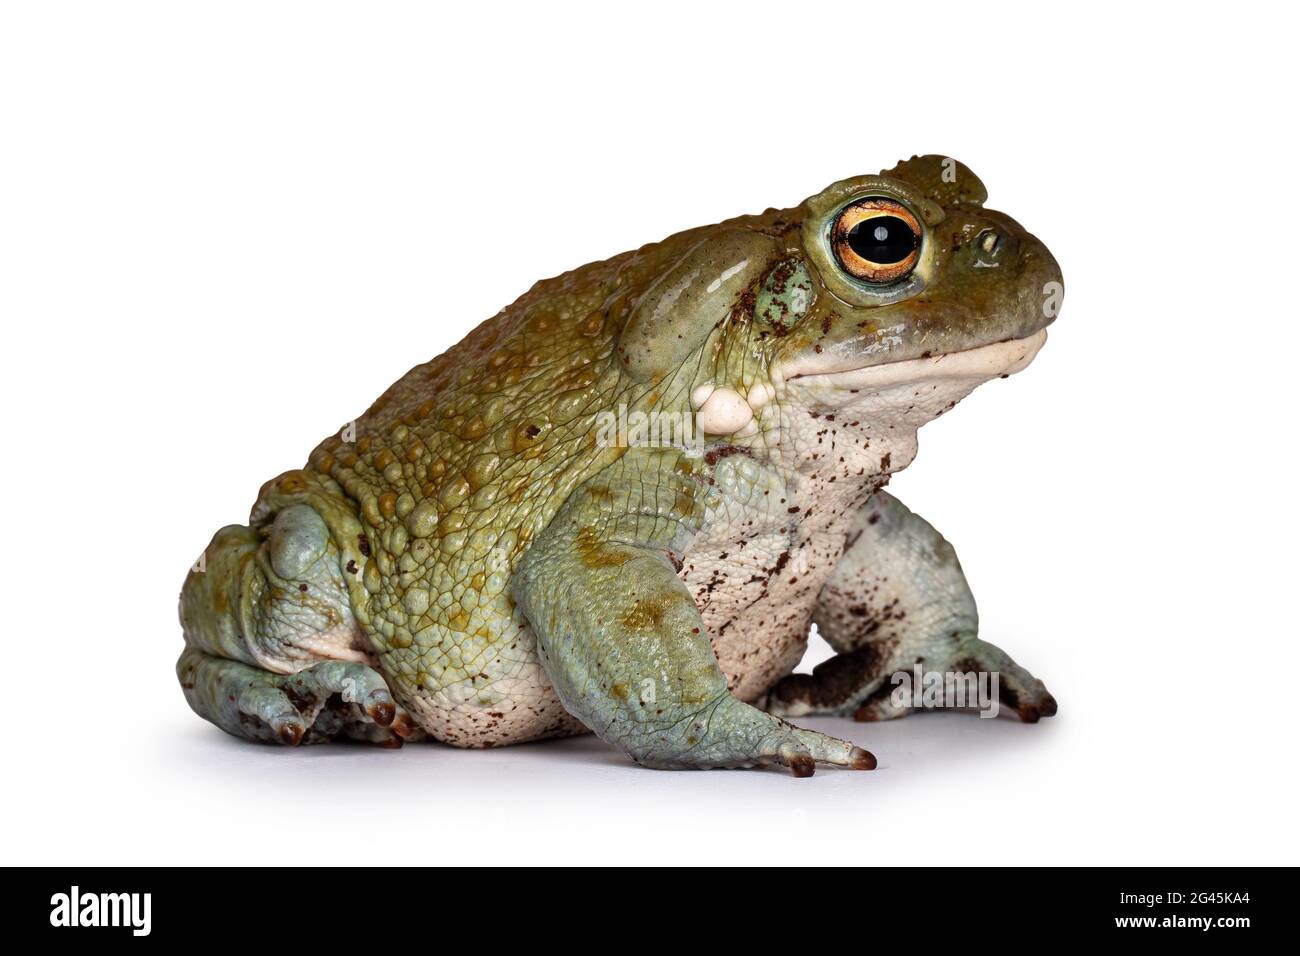 Bufo Alvarius aka Colorado River Toad, sitting side ways. Looking ahead with golden eyes. Isolated on white background. Stock Photo